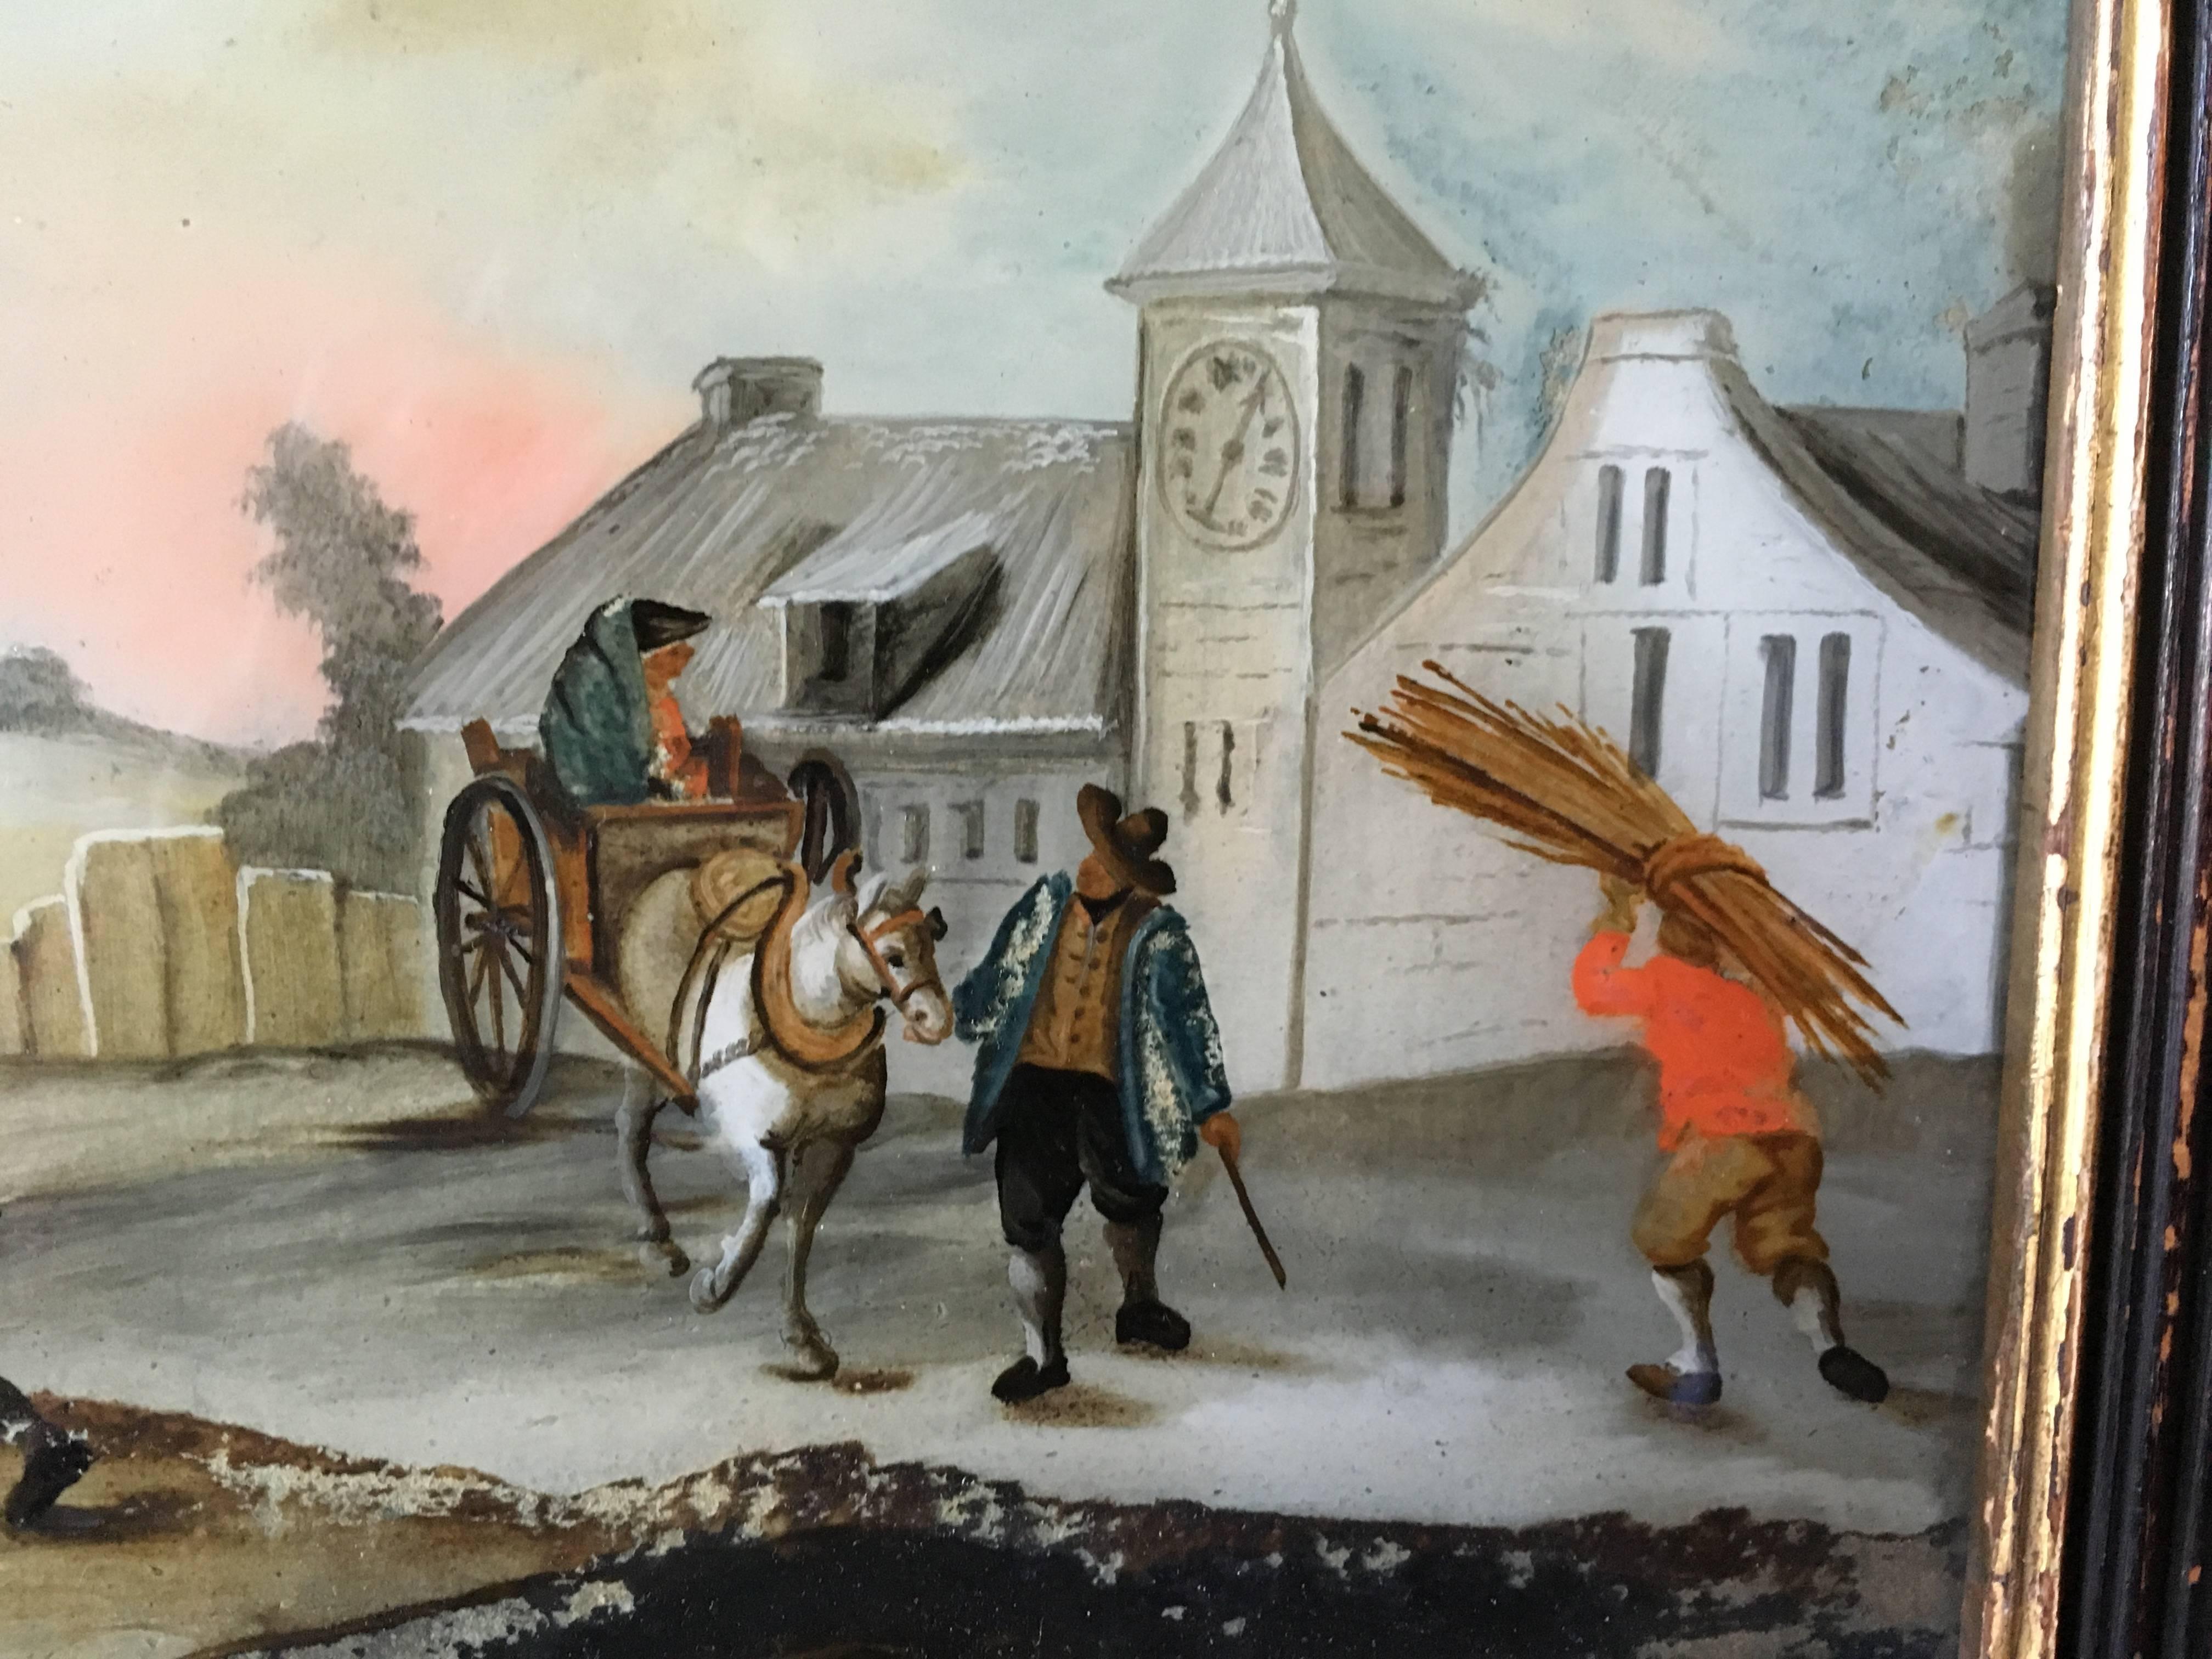 A charming églomisé painting (reverse painting on glass), circa 1800, in its original frame, depicting a village scene, probably French.